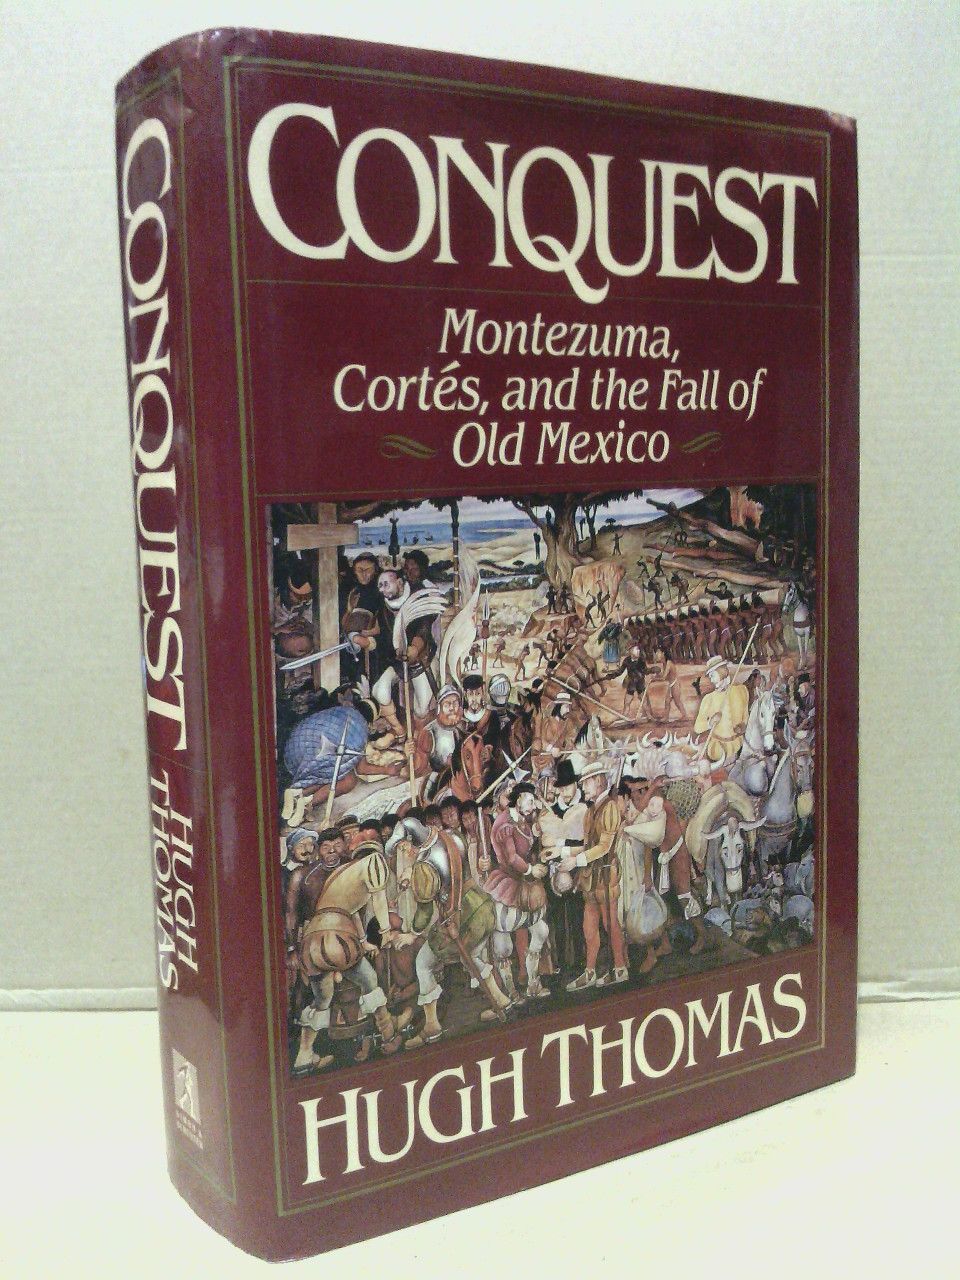 THOMAS, Hugh - CONQUEST: Montezuma, Corts, and the Fall of Old Mexico